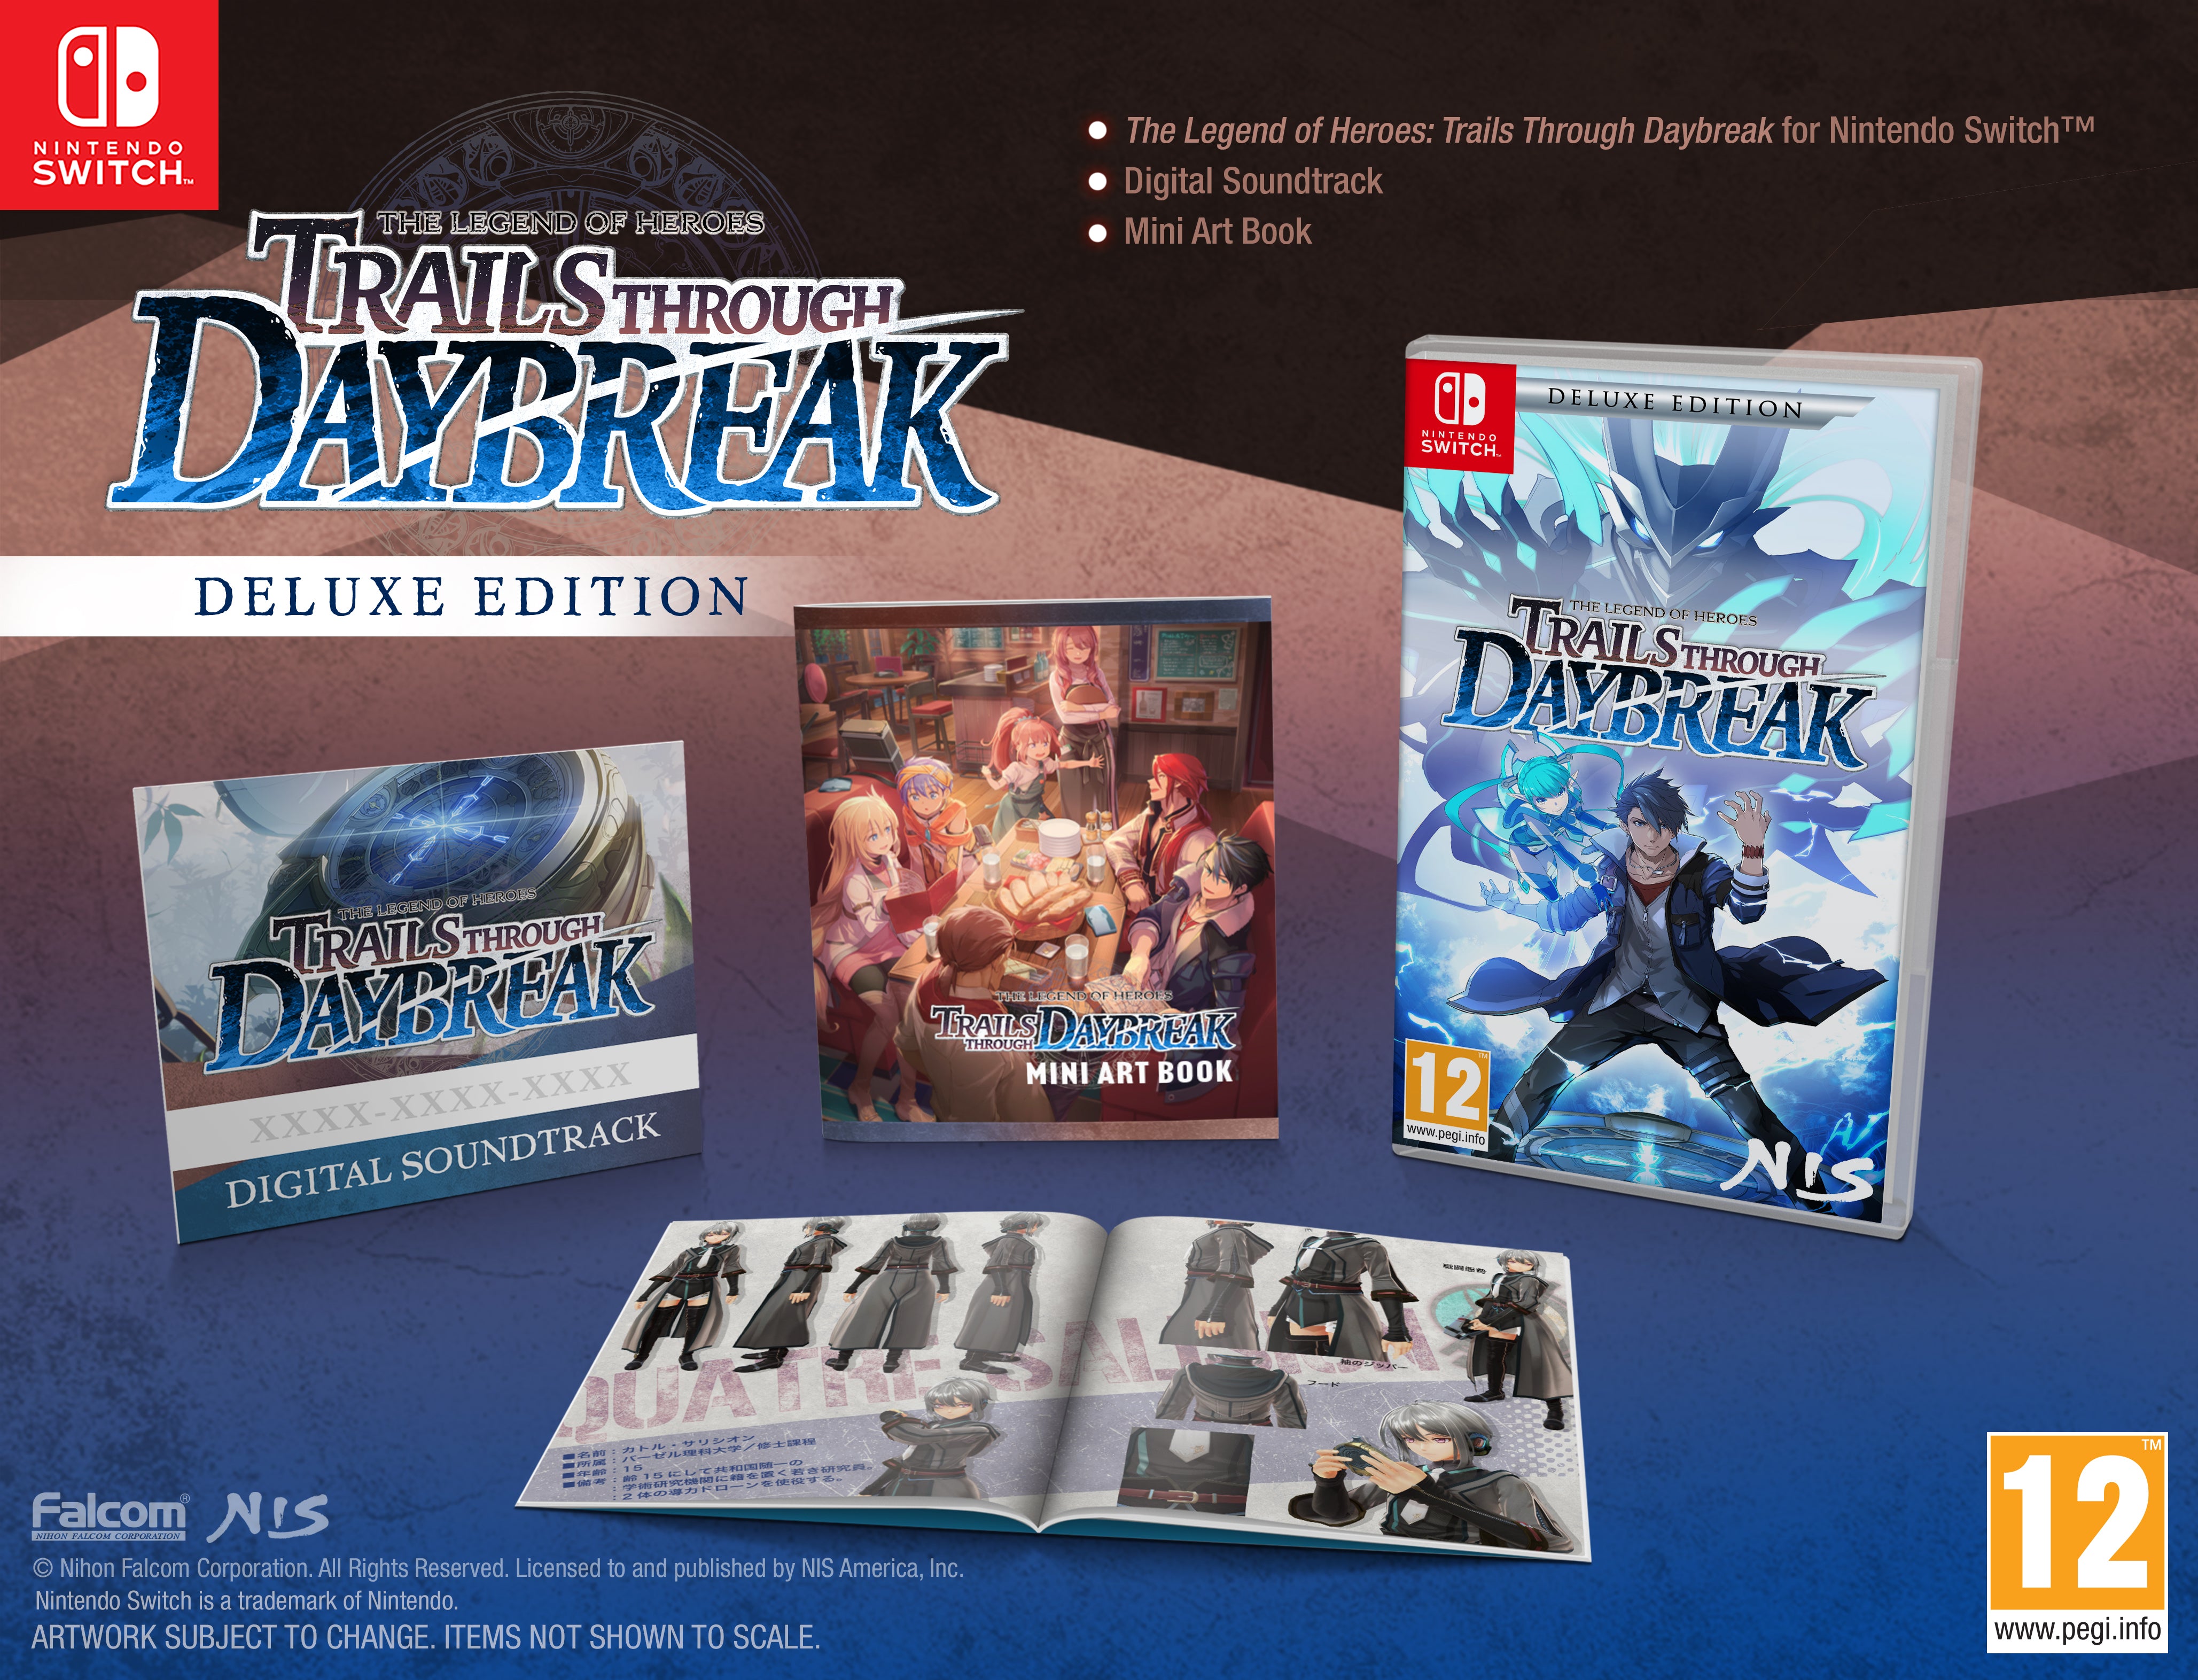 The Legend of Heroes: Trails through Daybreak - Deluxe Edition - Nintendo Switch™